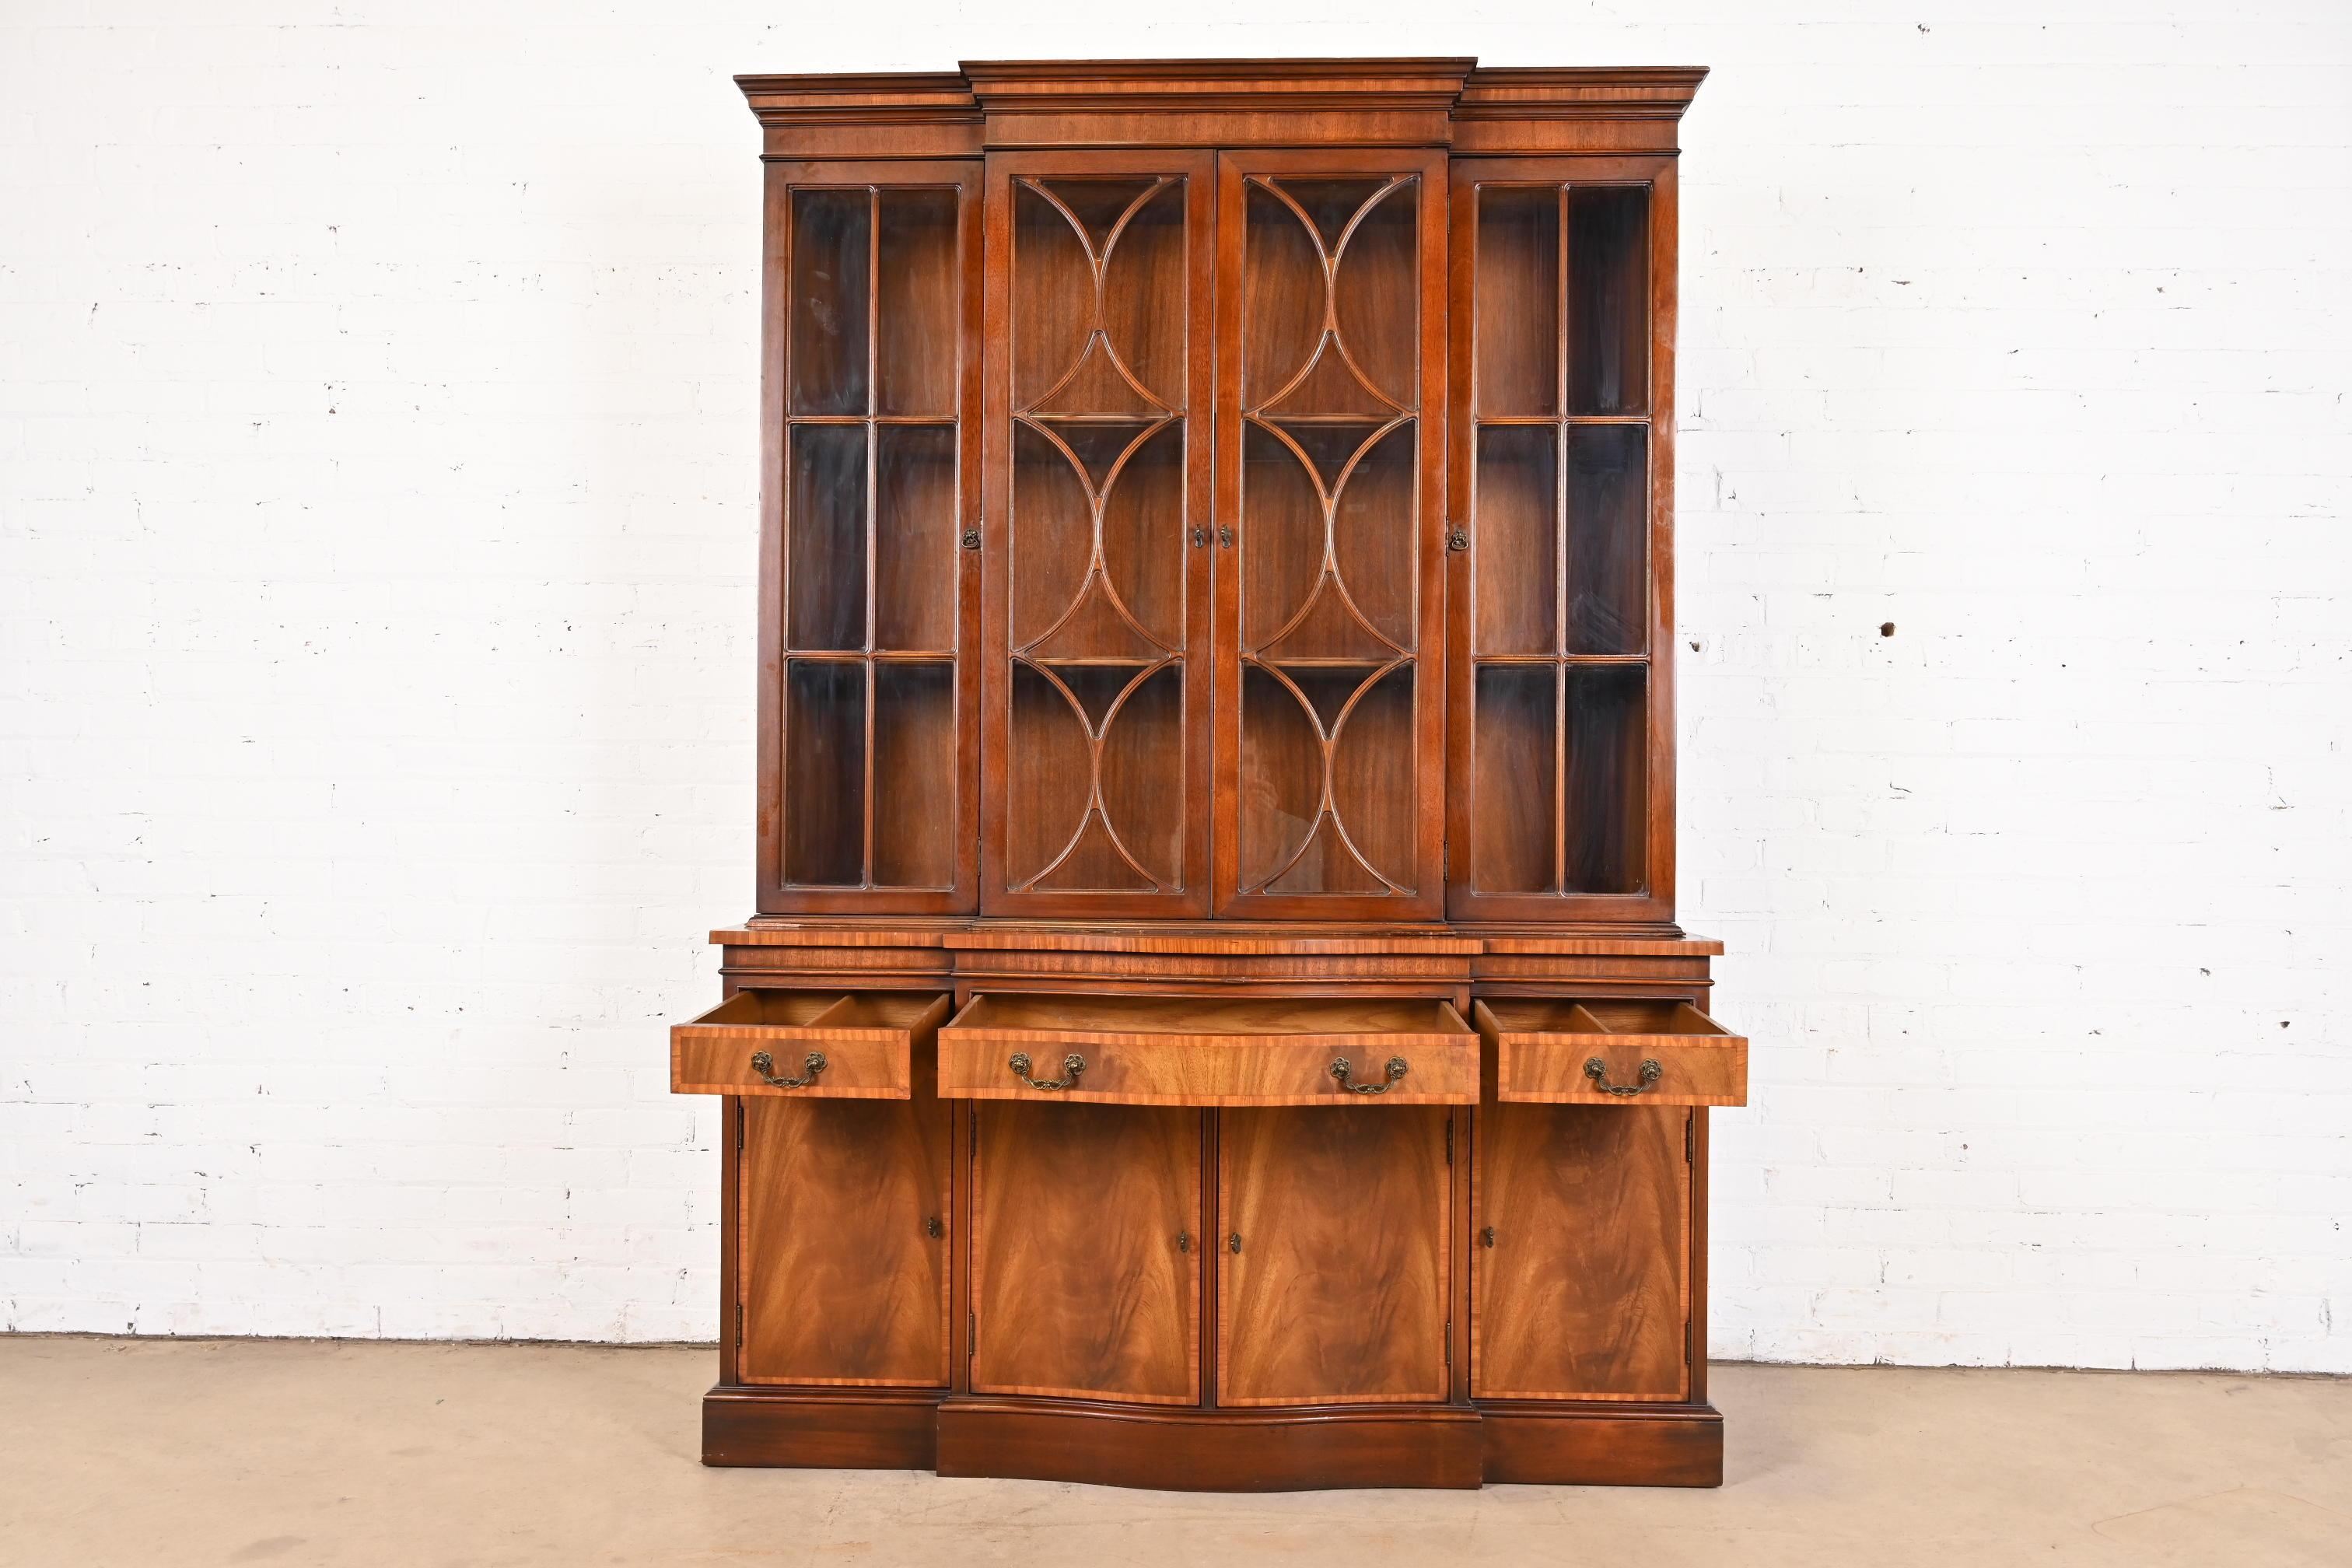 Mid-20th Century Georgian Carved Flame Mahogany Breakfront Bookcase Cabinet by Fancher, 1940s For Sale